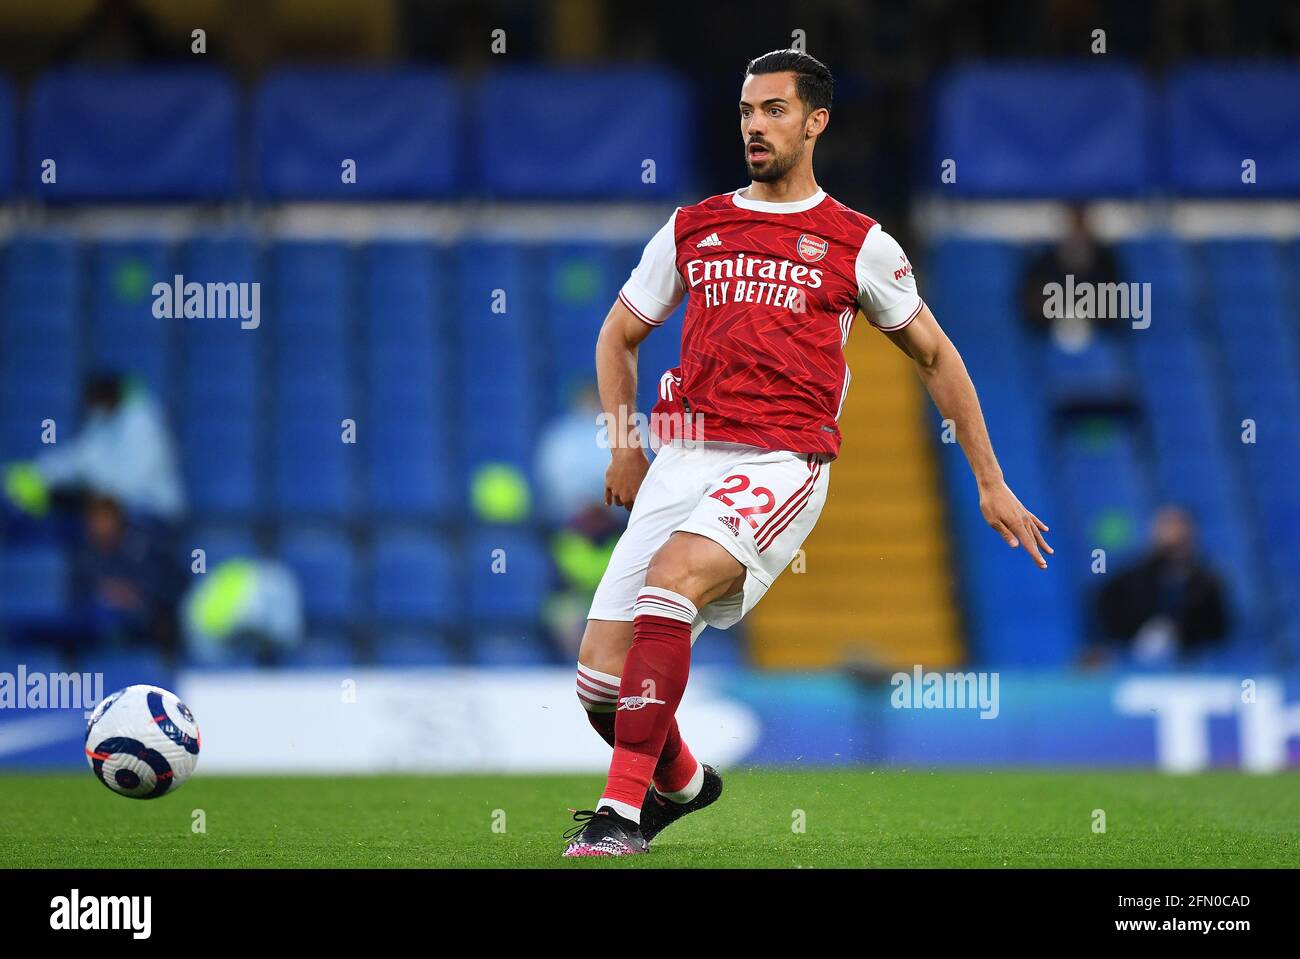 London, UK. 12th May, 2021. 12th May 2021 - Chelsea v Arsenal - Premier League - Stamford Bridge - London Arsenal's Pablo Mari during the Premier League match against Chelsea. Picture Credit : Credit: Mark Pain/Alamy Live News Stock Photo